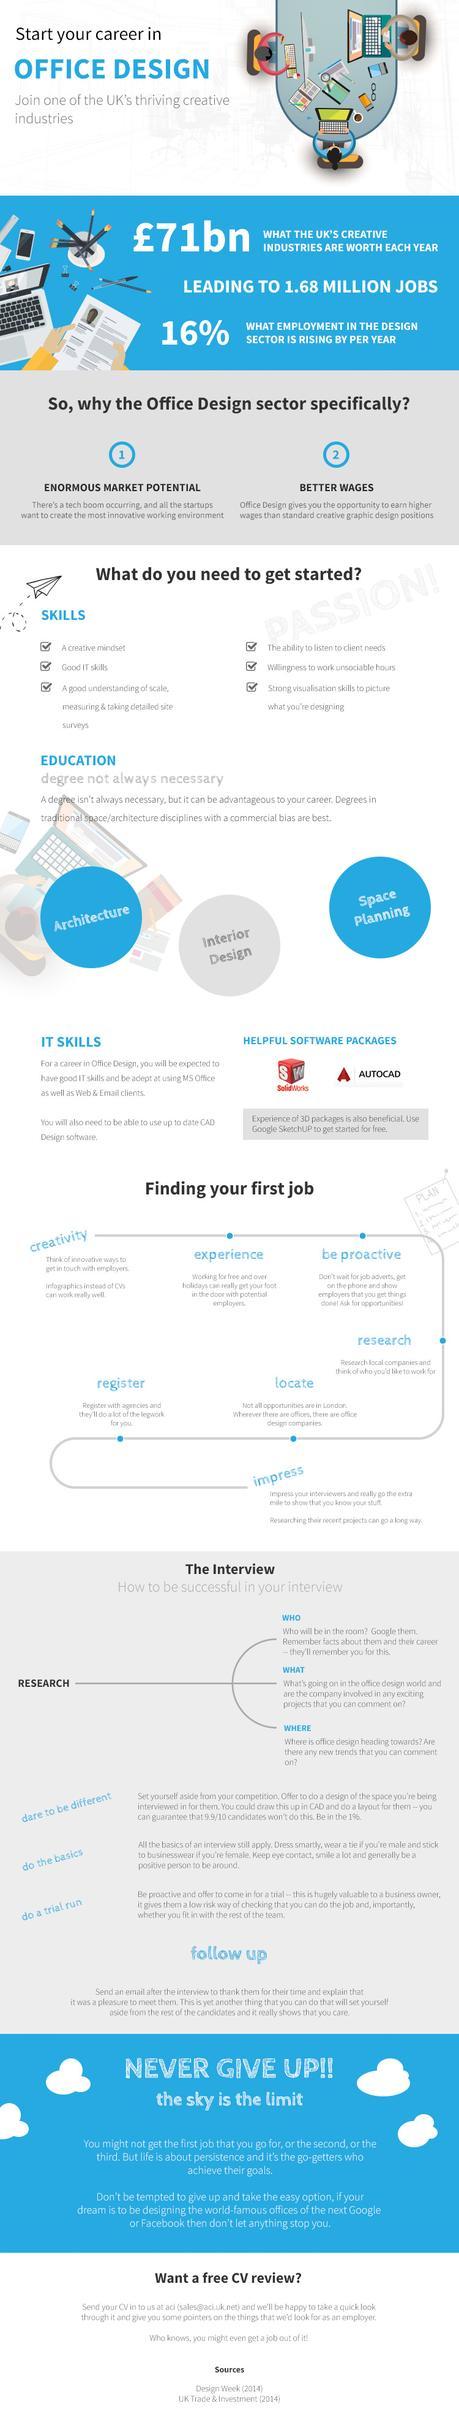 How To Start A Career In Office Design Infographic